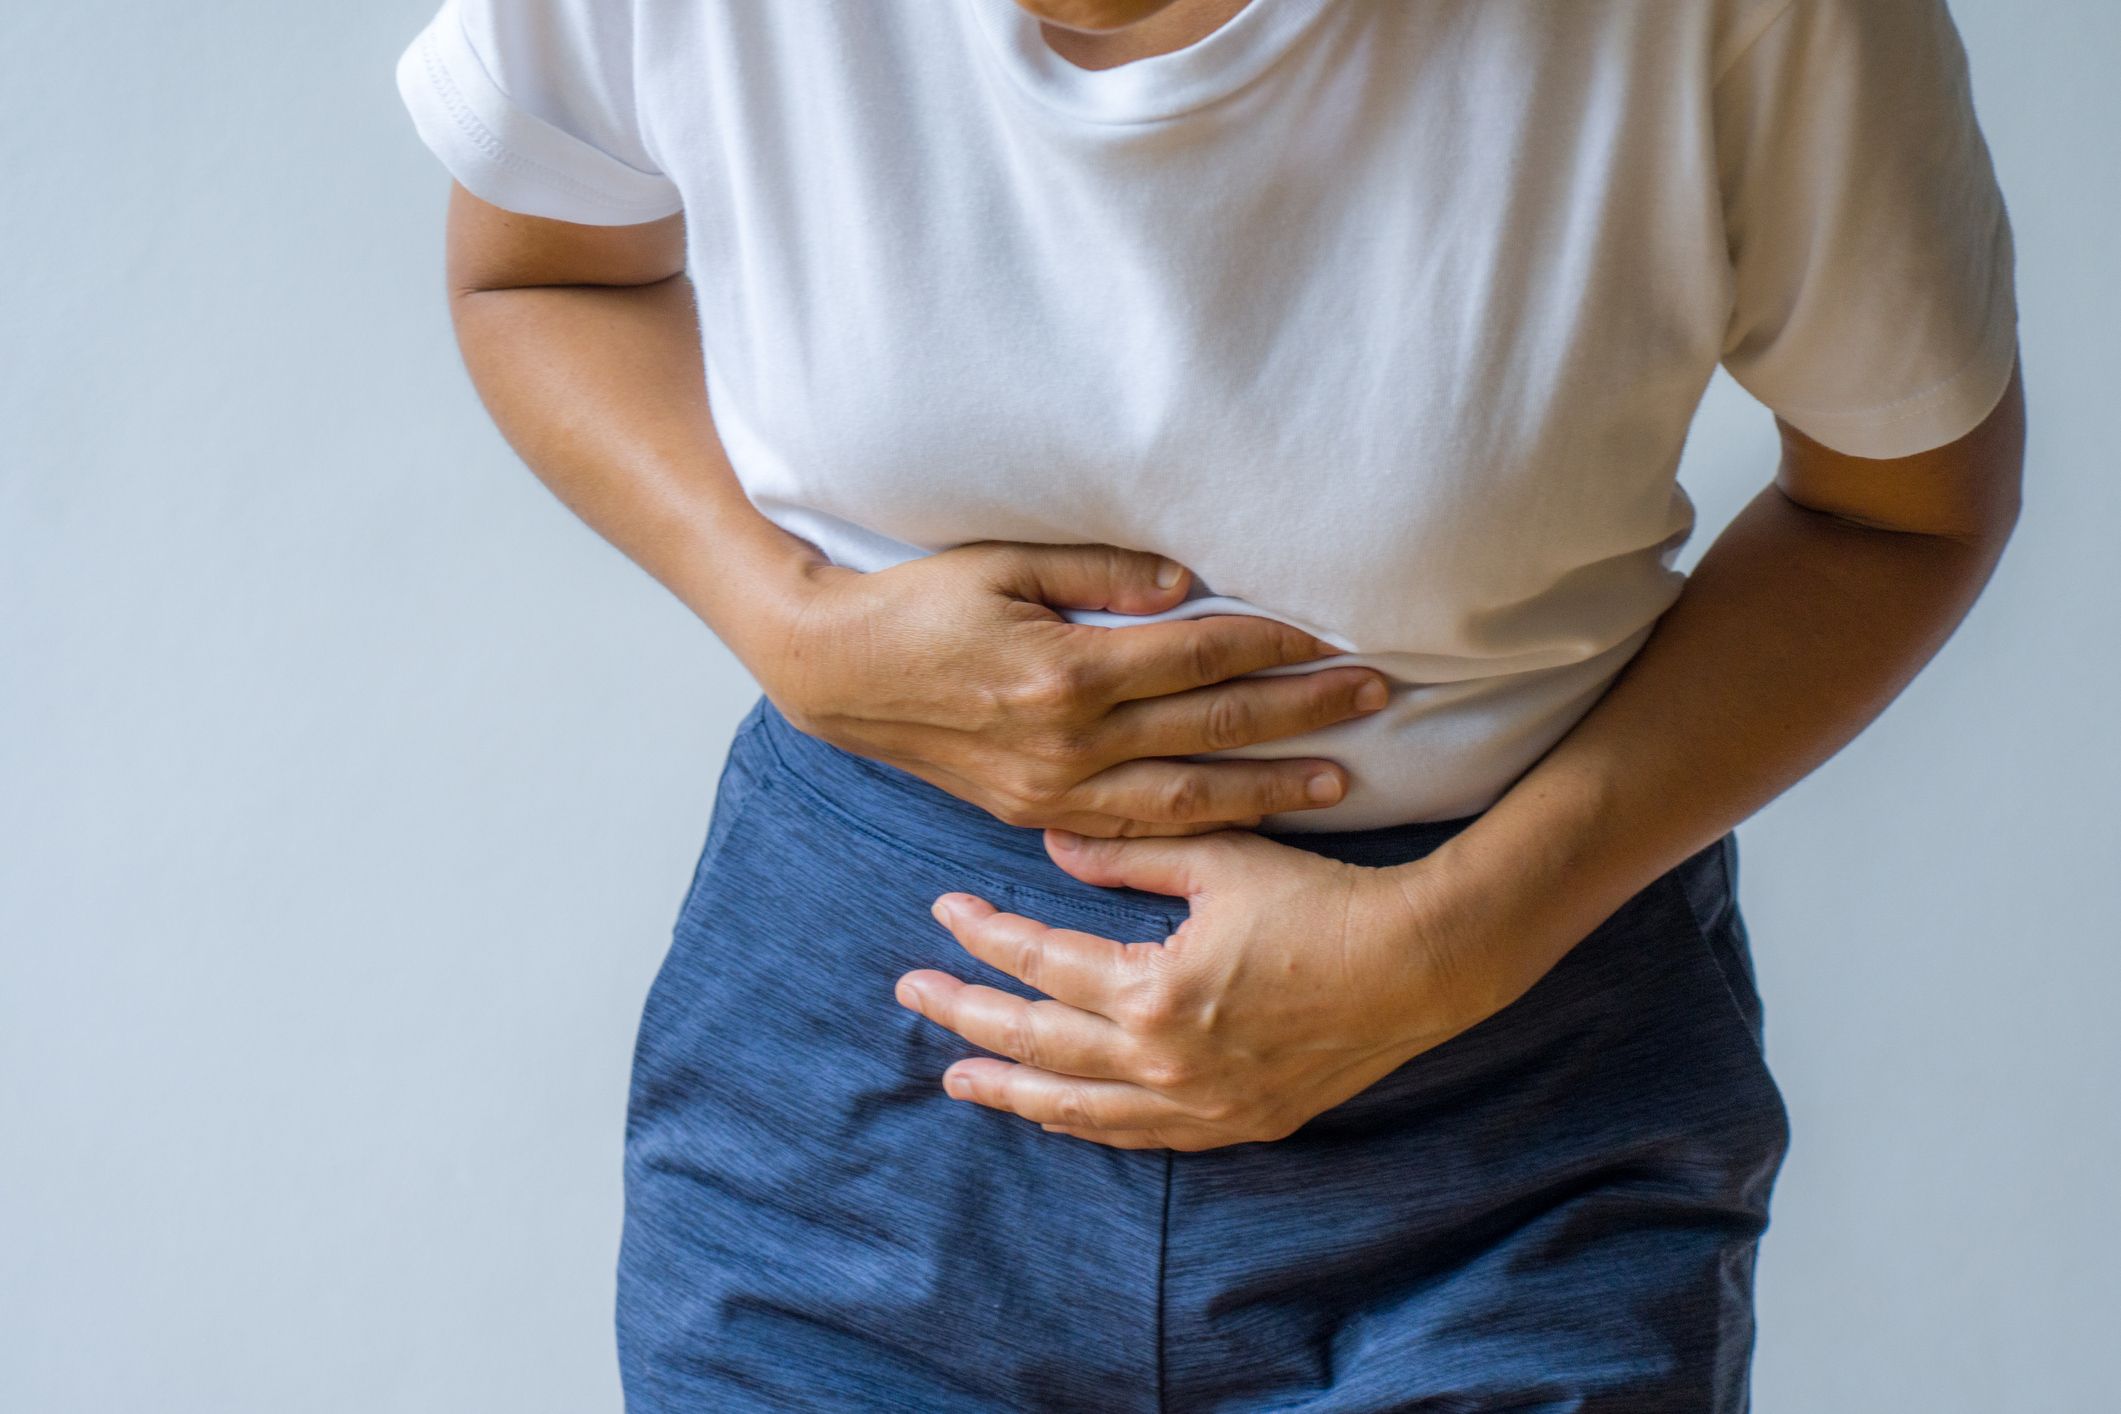 Can Cholecystitis Cause Insomnia?